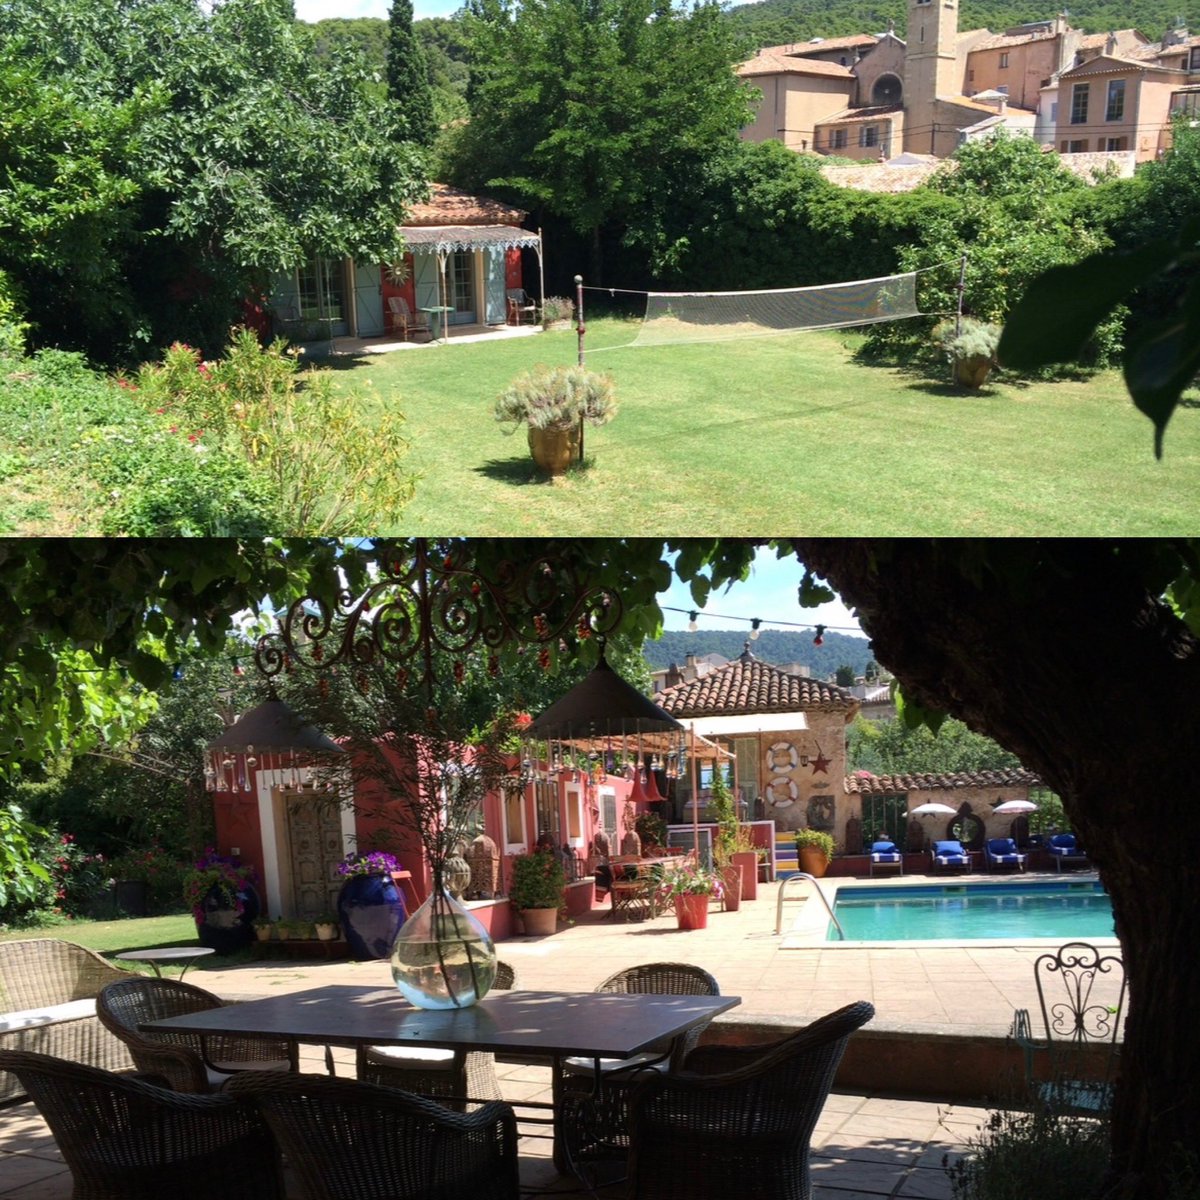 Heart sore to sell Le Pigeonnier in Provence after 30 Summers. Sleeps 7, pool, badminton, olive and fruit trees. agencegrossi.com/v2/a-vendre/au…